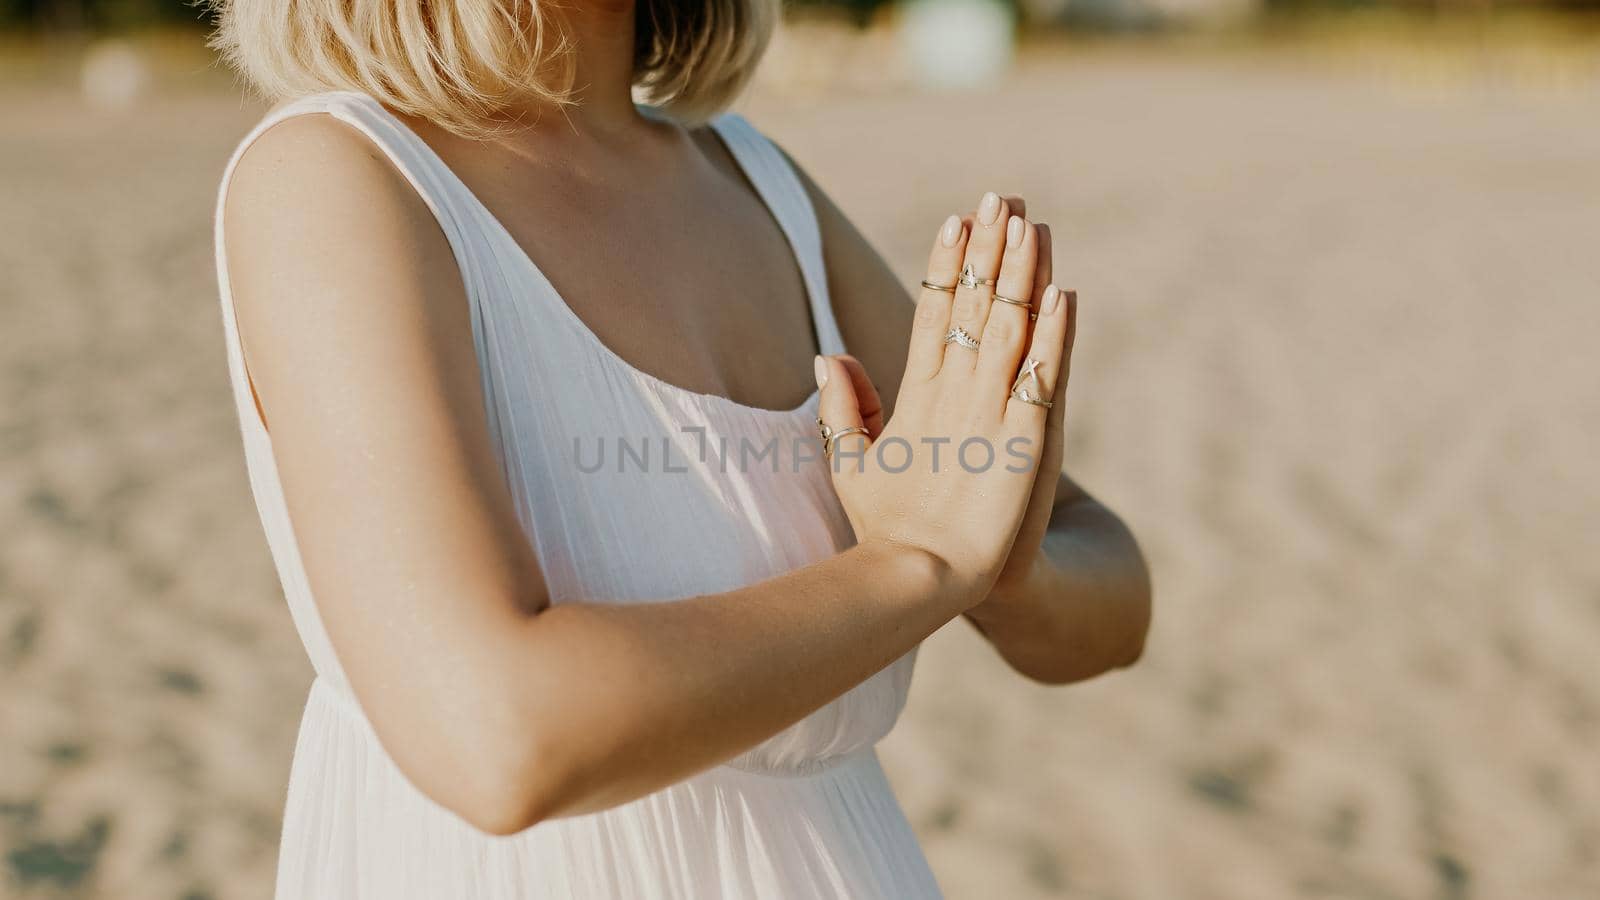 Praying meditating woman, reading mantras, directs thoughts, requests or gratitude to universe. Beach, morning near sea. Spirituality, religion, God concept. by kristina_kokhanova